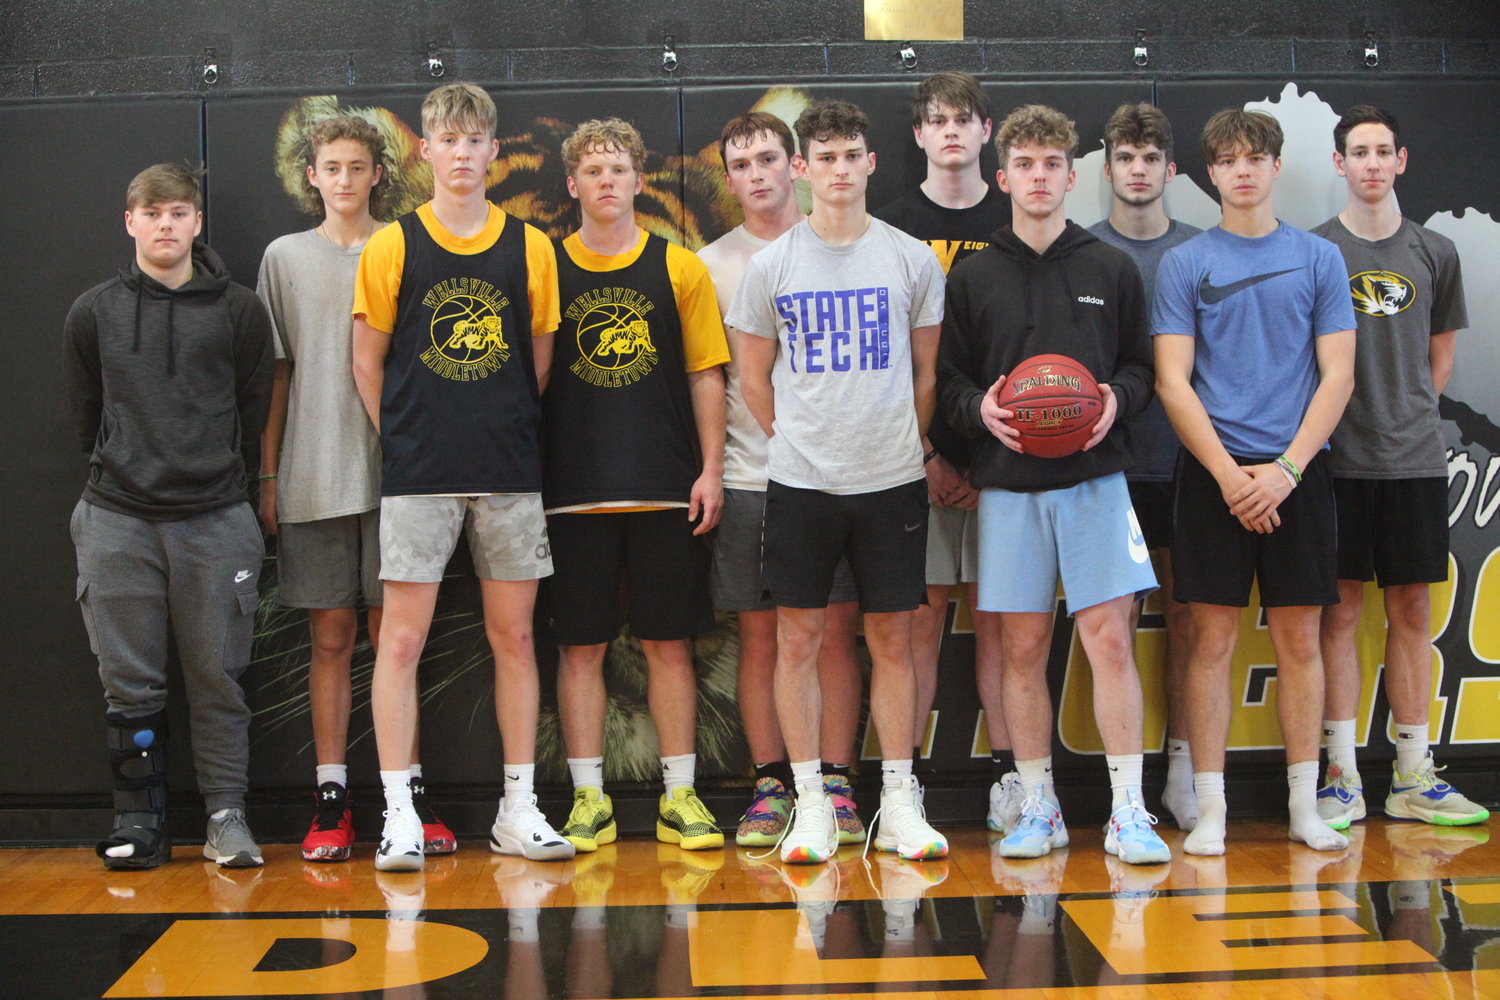 The Wellsville-Middletown boys basketball team is looking to finish with its second straight winning season this winter. Pictured, from left, are CJ Curd, Gage Marshall, Isaac Seabaugh, Keaton Mayes, Carson Huff, Keaton Marshall, Logan Pursifull, Lucas Moore, Jacob Mandrell, Dylan Alsop and Cooper Henderson. Not pictured is Hunter Bickell.